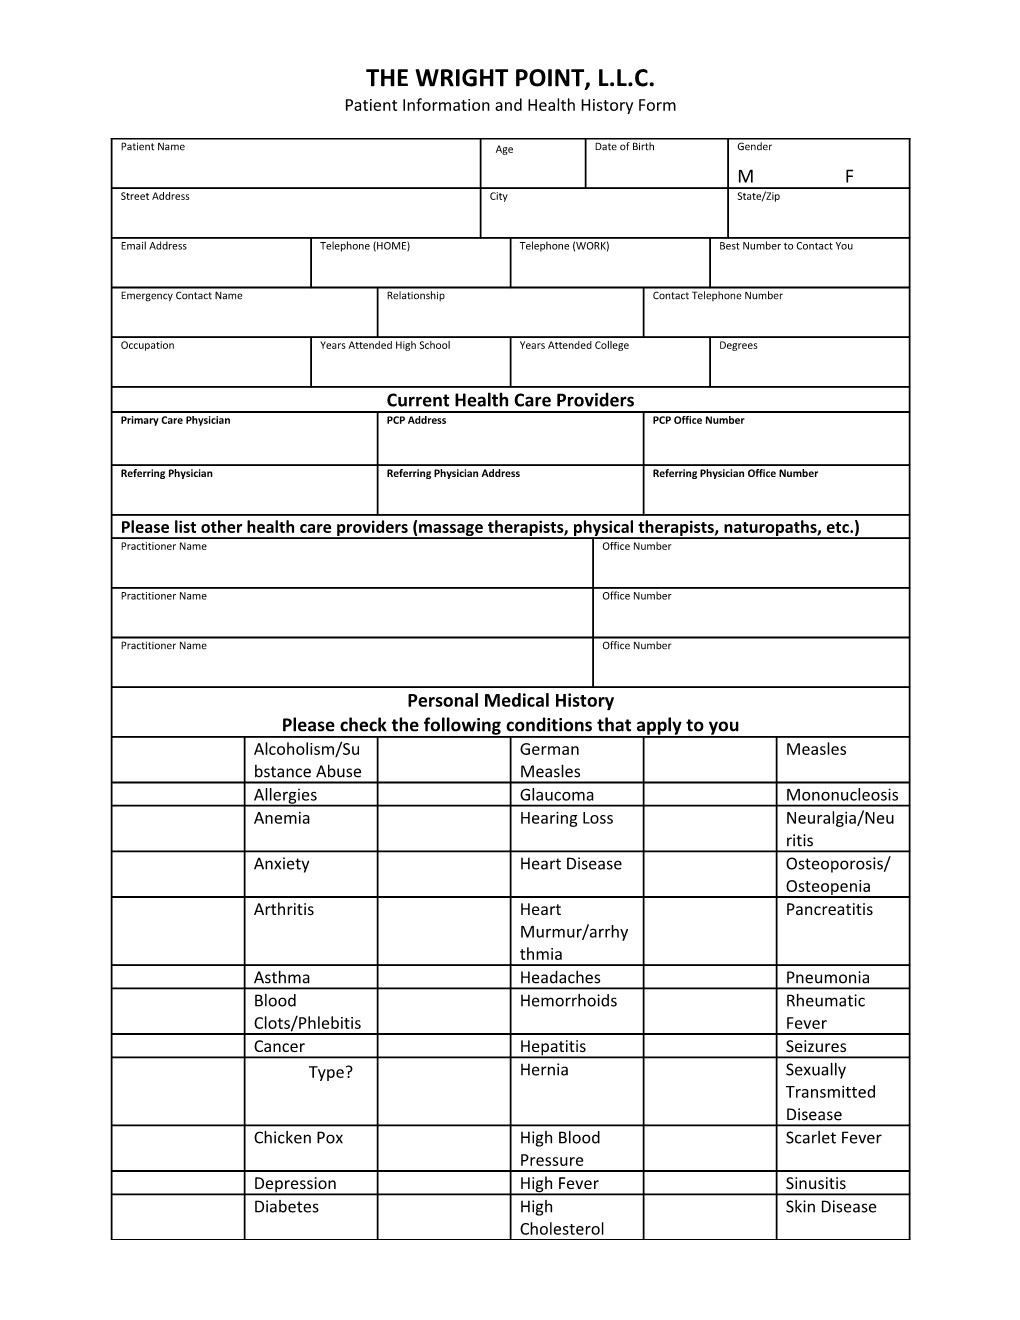 The Wright Point, LLC Patient Information & Health History Form